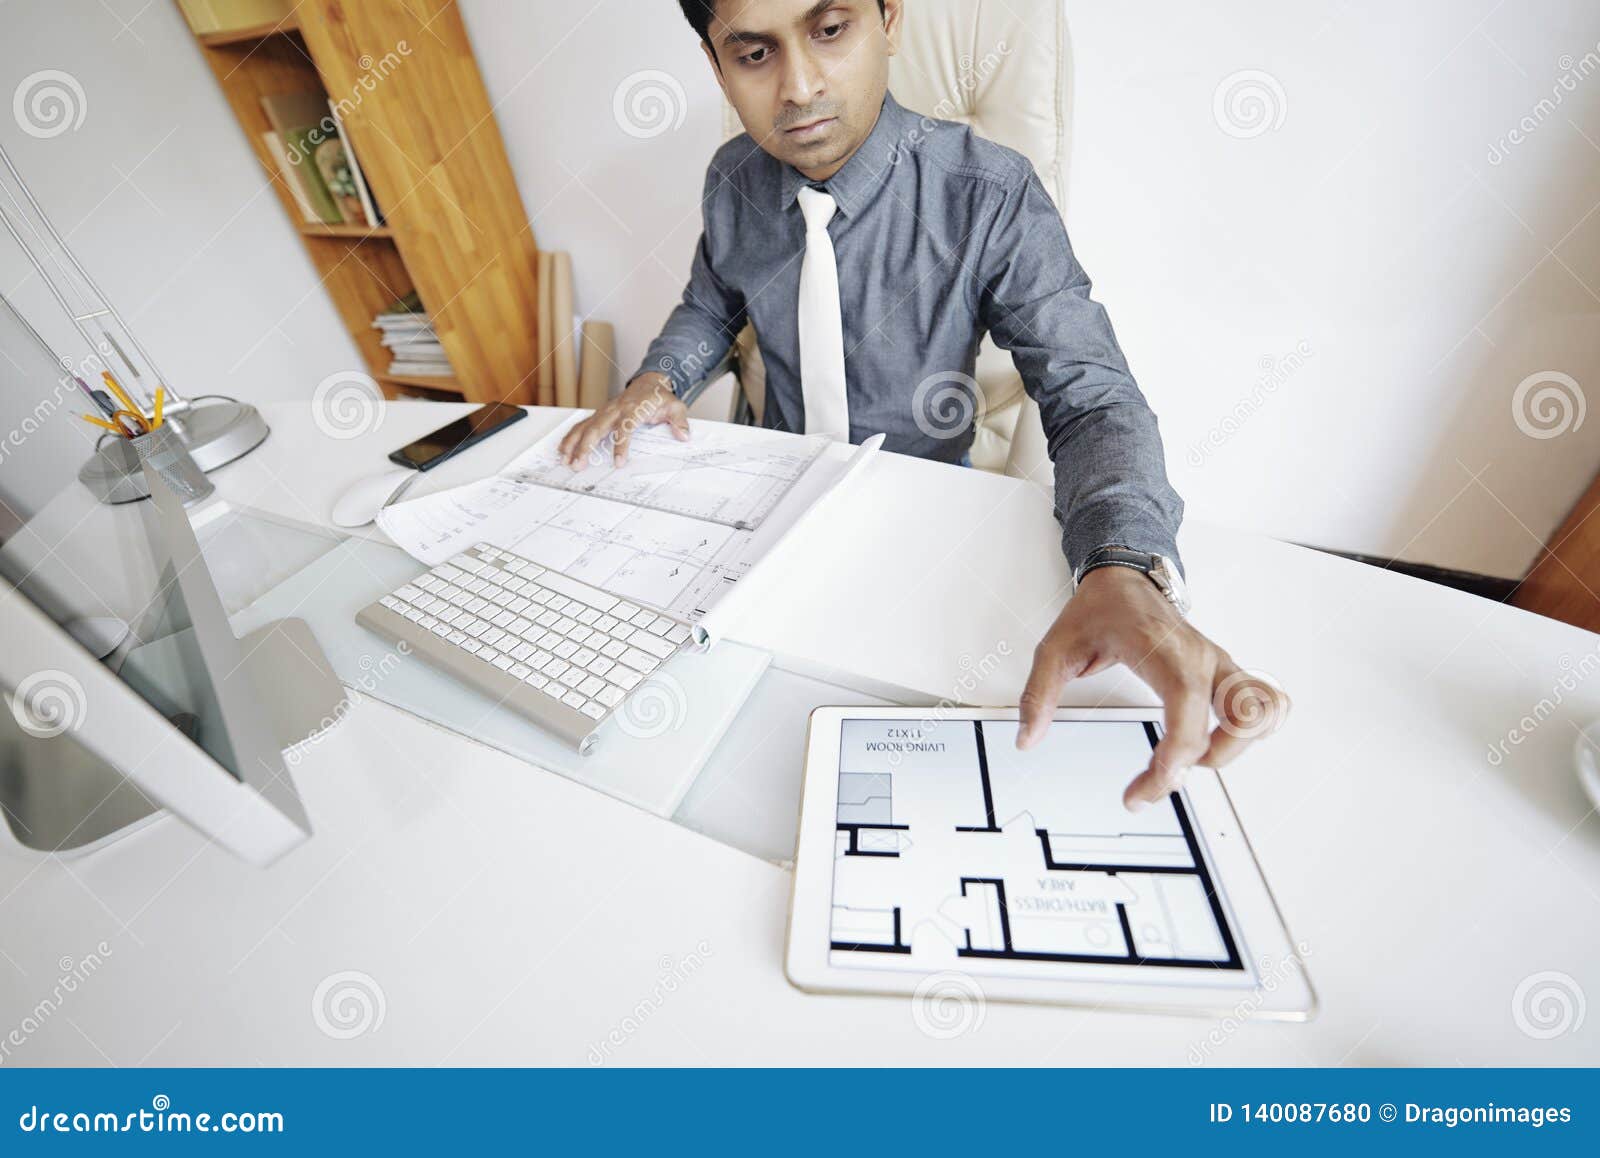 Civil Engineer Working with Blueprints Stock Photo - Image of plan, engineer:  140087680